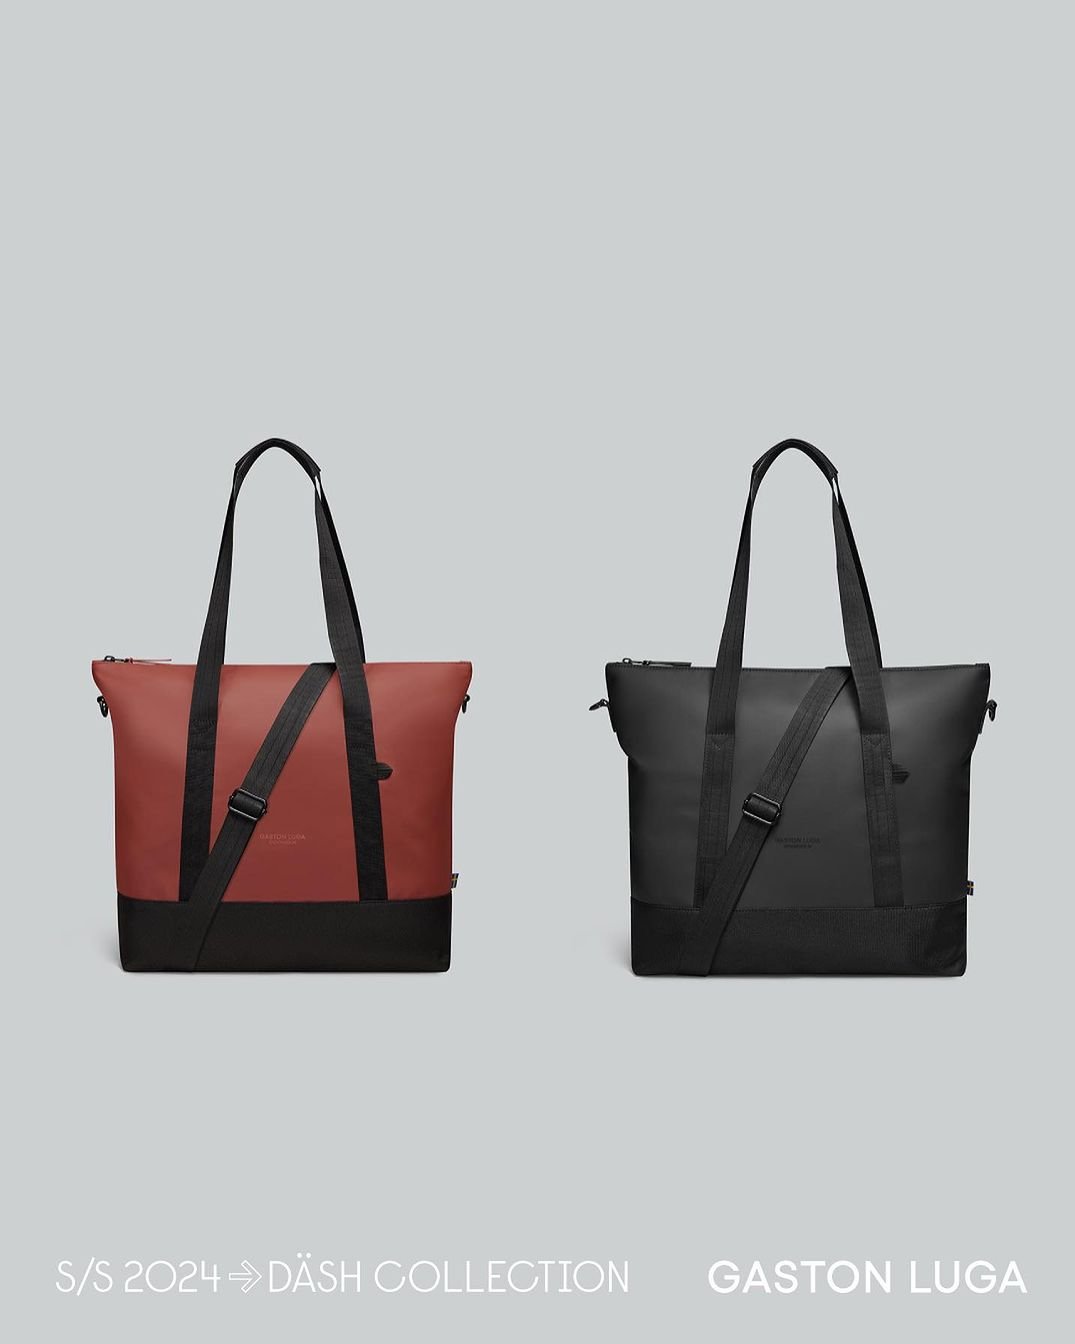 The Däsh Shopper is designed such that it is easy to carry your favourite items throughout the day.The long handle allows you to wear it comfortably over your shoulder, while the extra-long strap provides additional options for carrying.#gastonluga